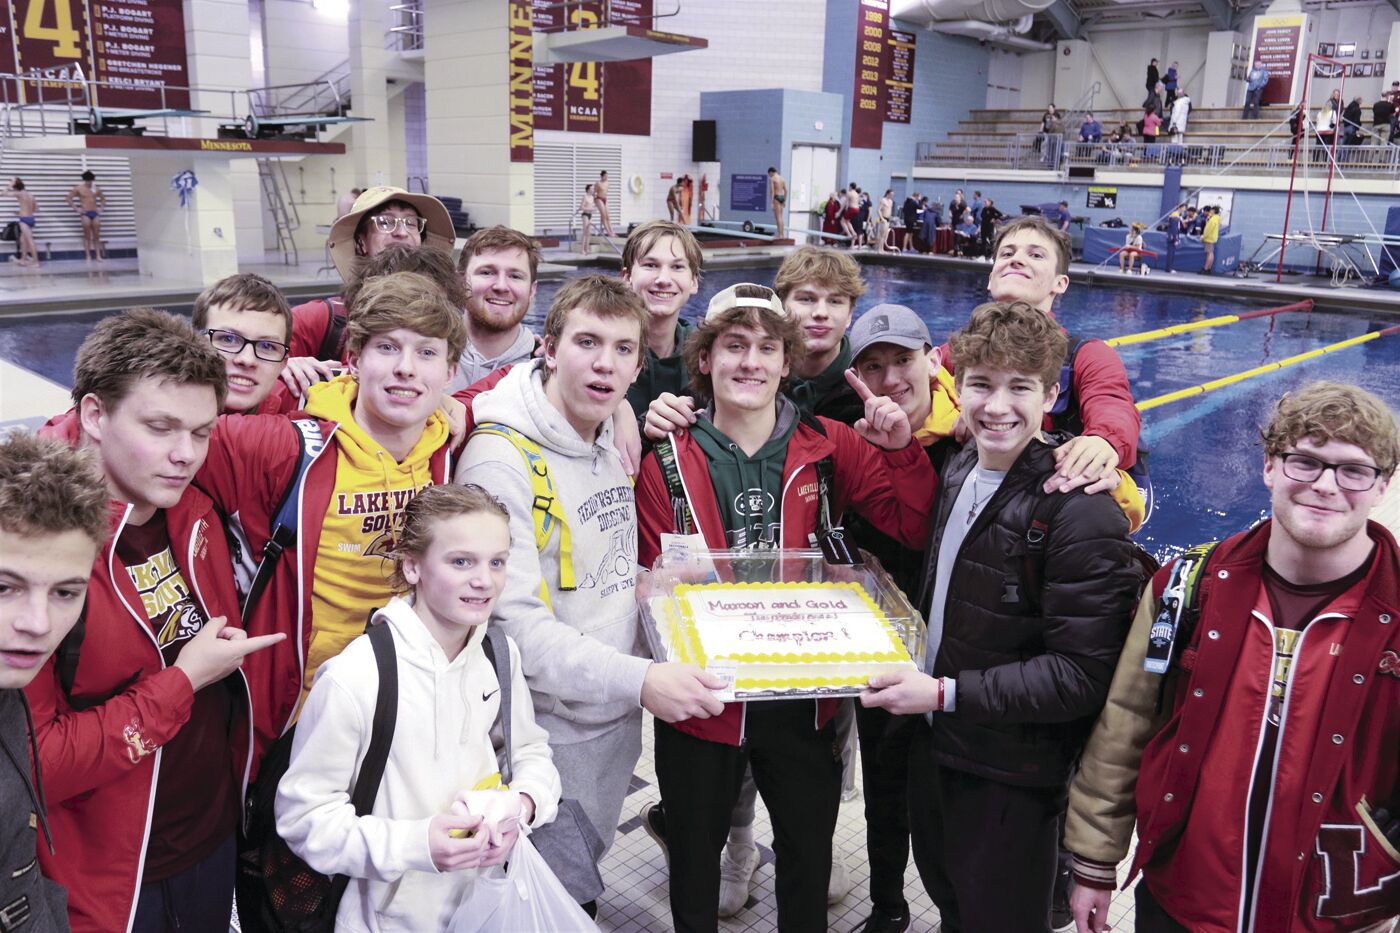 Cougars take the cake at Maroon and Gold Invite